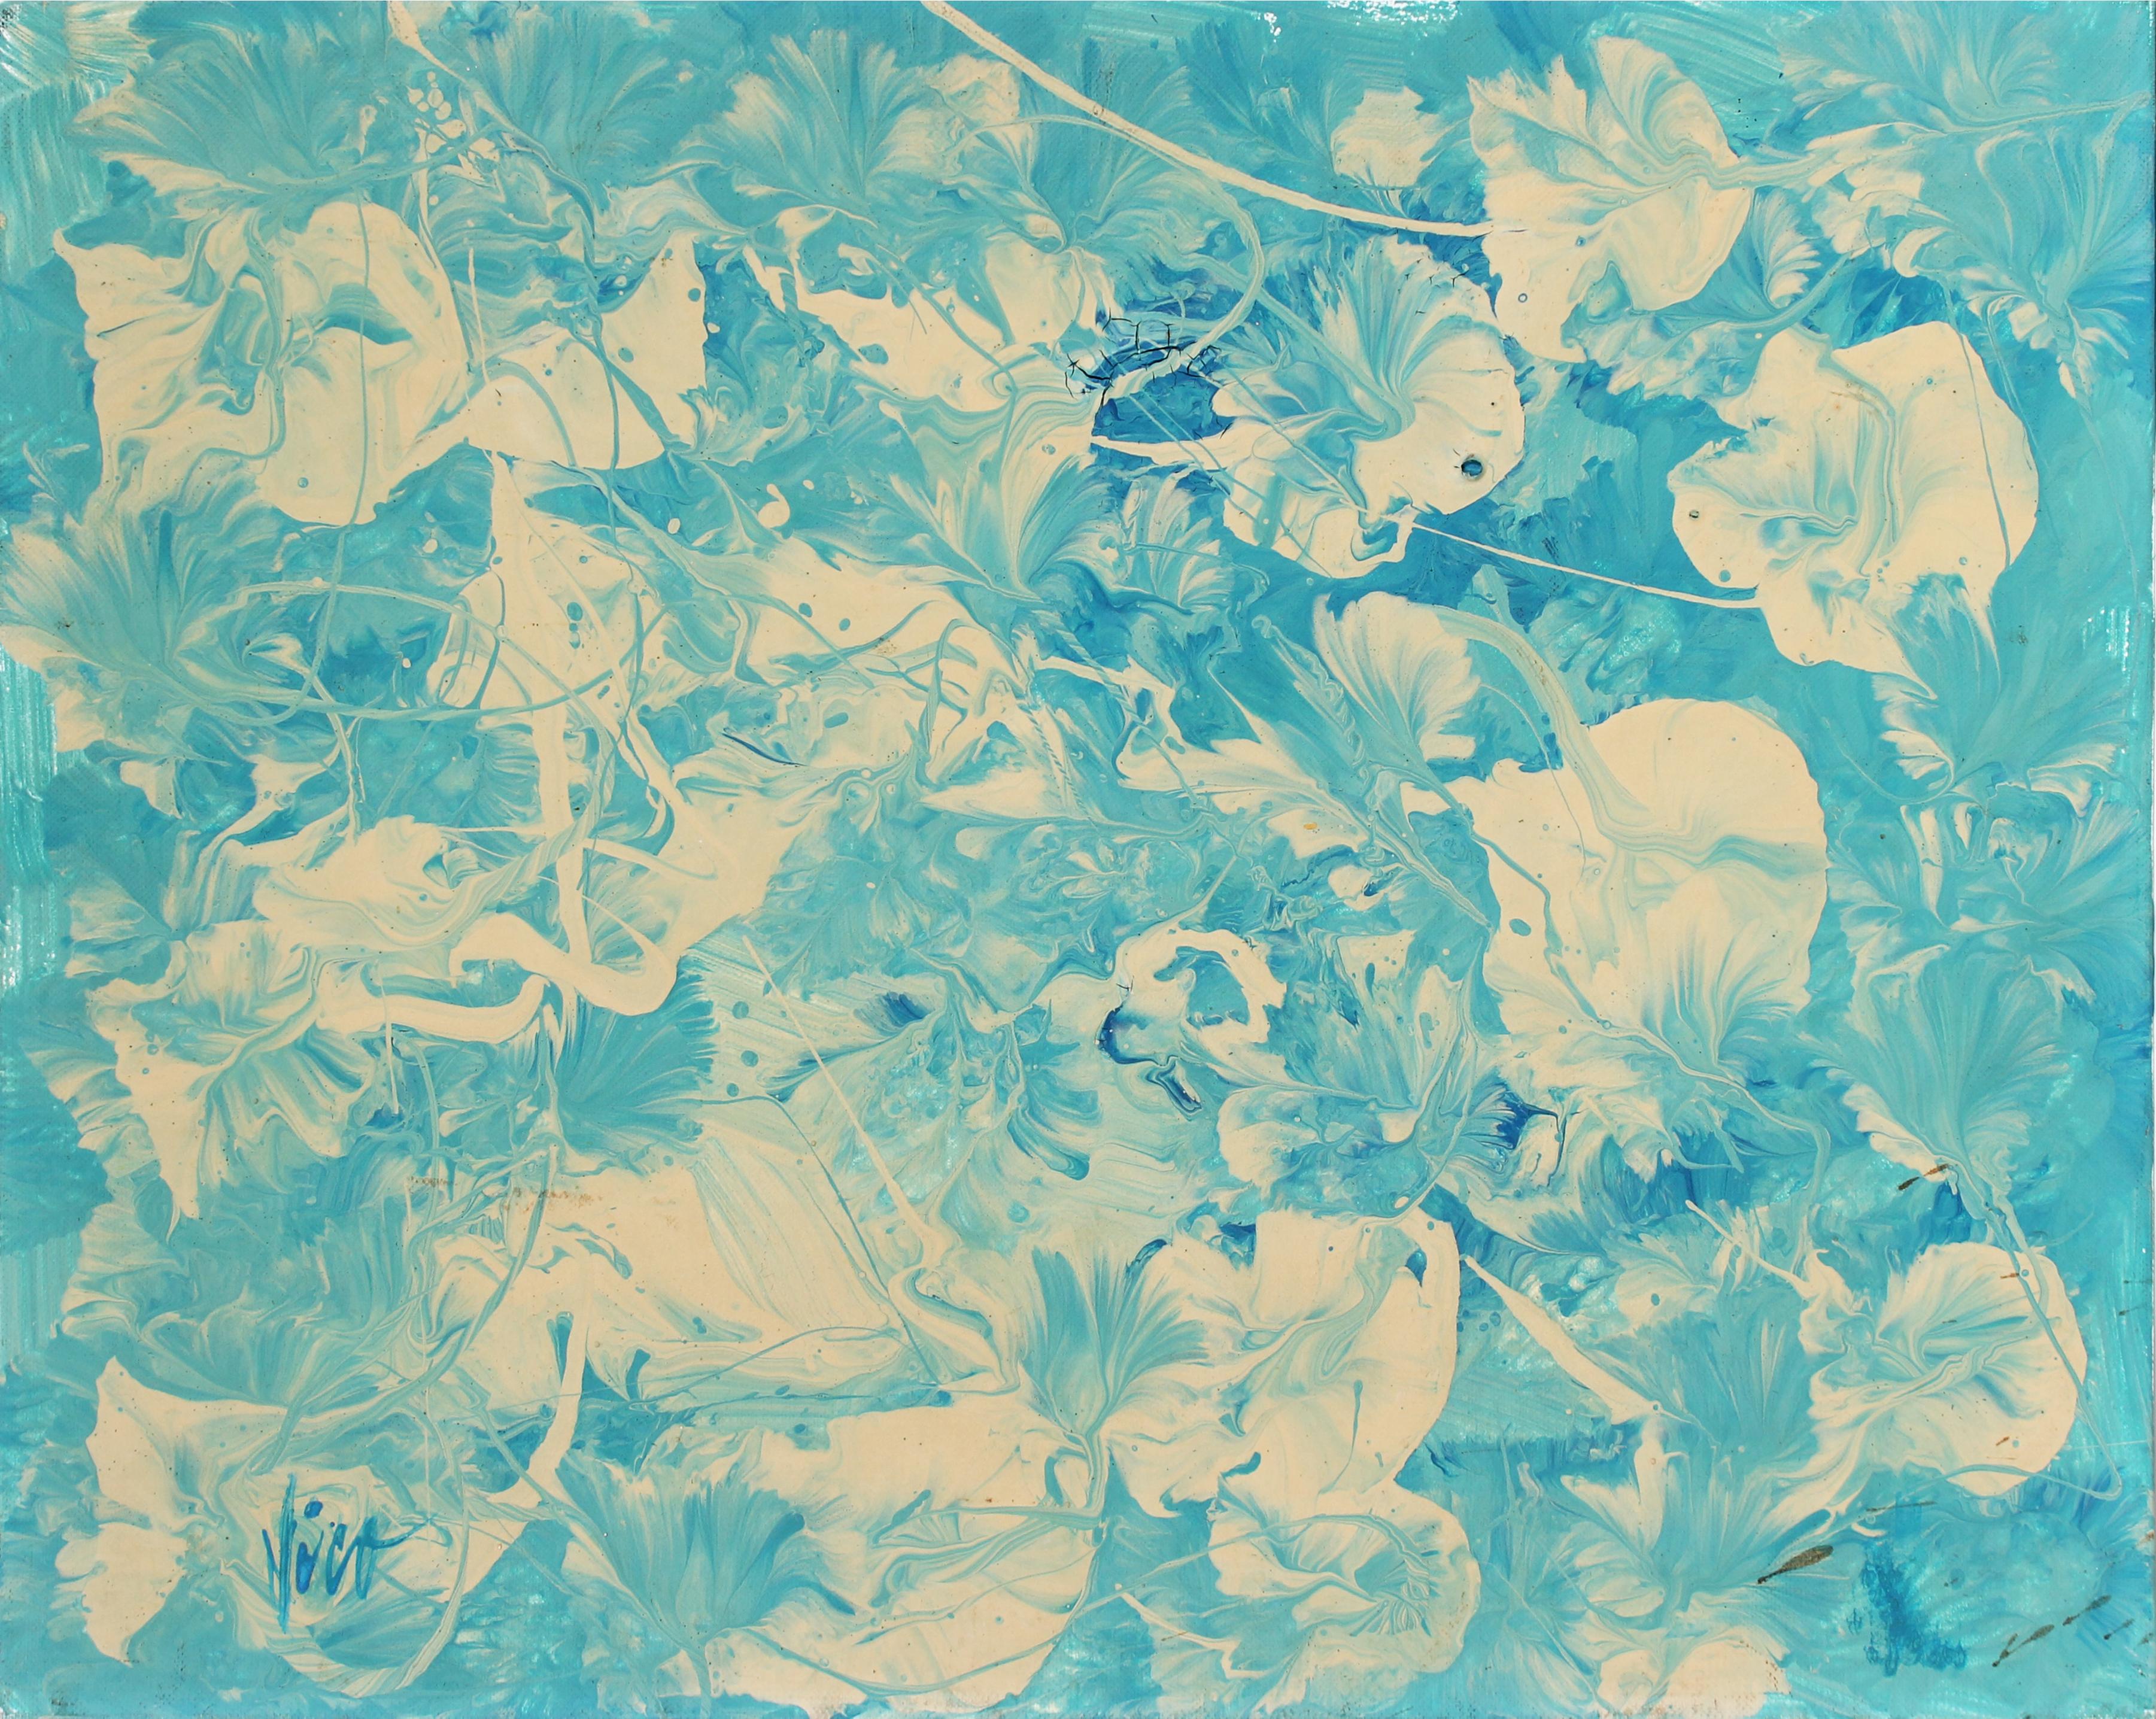 Wiveca Rubinow Abstract Painting - "Petunia Blues" Abstract Oil Painting in Teal & White, 1960s